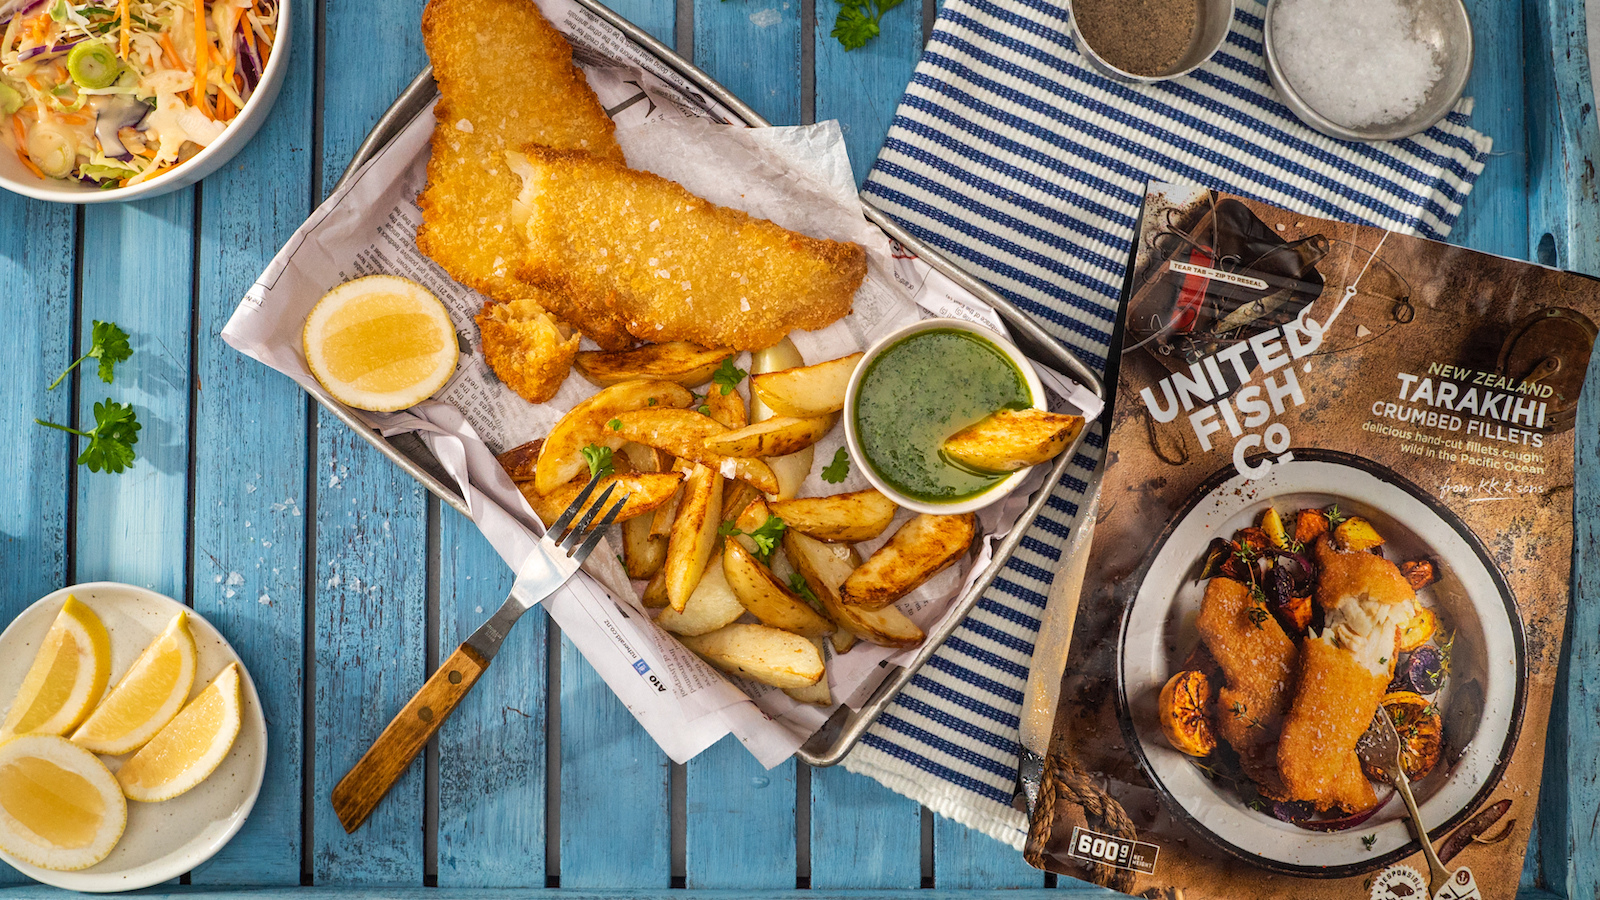 June Must-Haves 2023 - Crumbed fired fish with potato wedges, herby sauce, and a bag of United Food Co crumbed tarakihi fillets